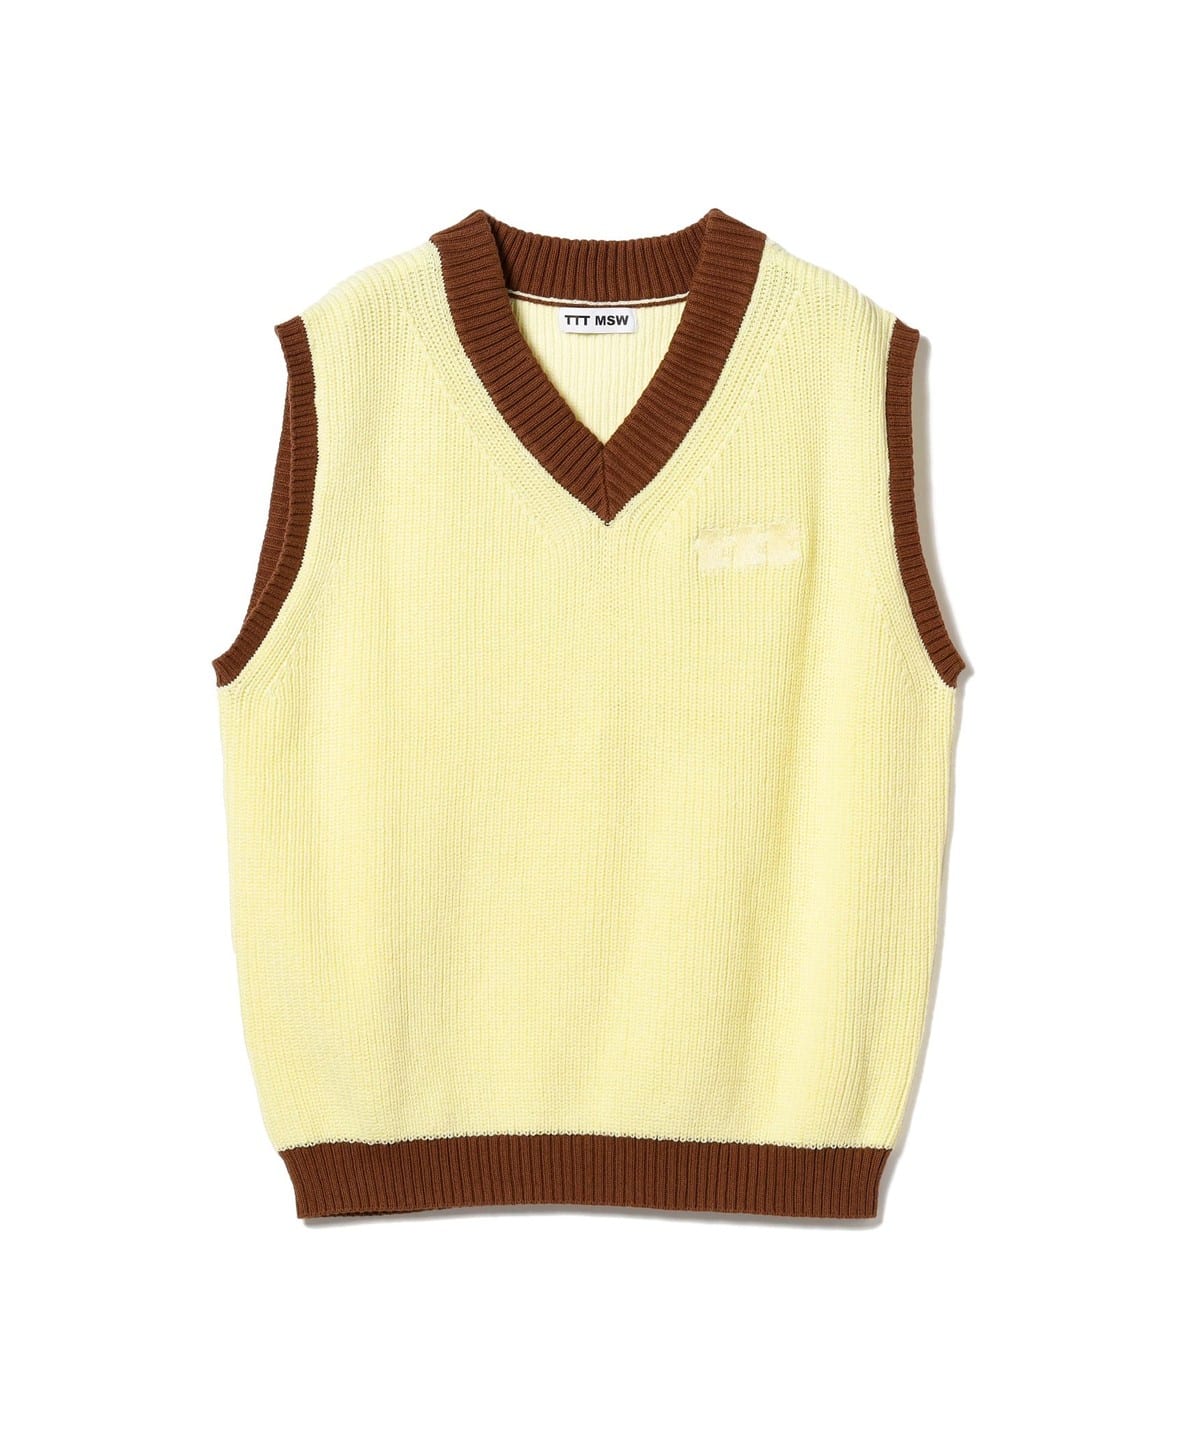 BEAMS（ビームス）【アウトレット】TTTMSW / New Standard Knit Vest 